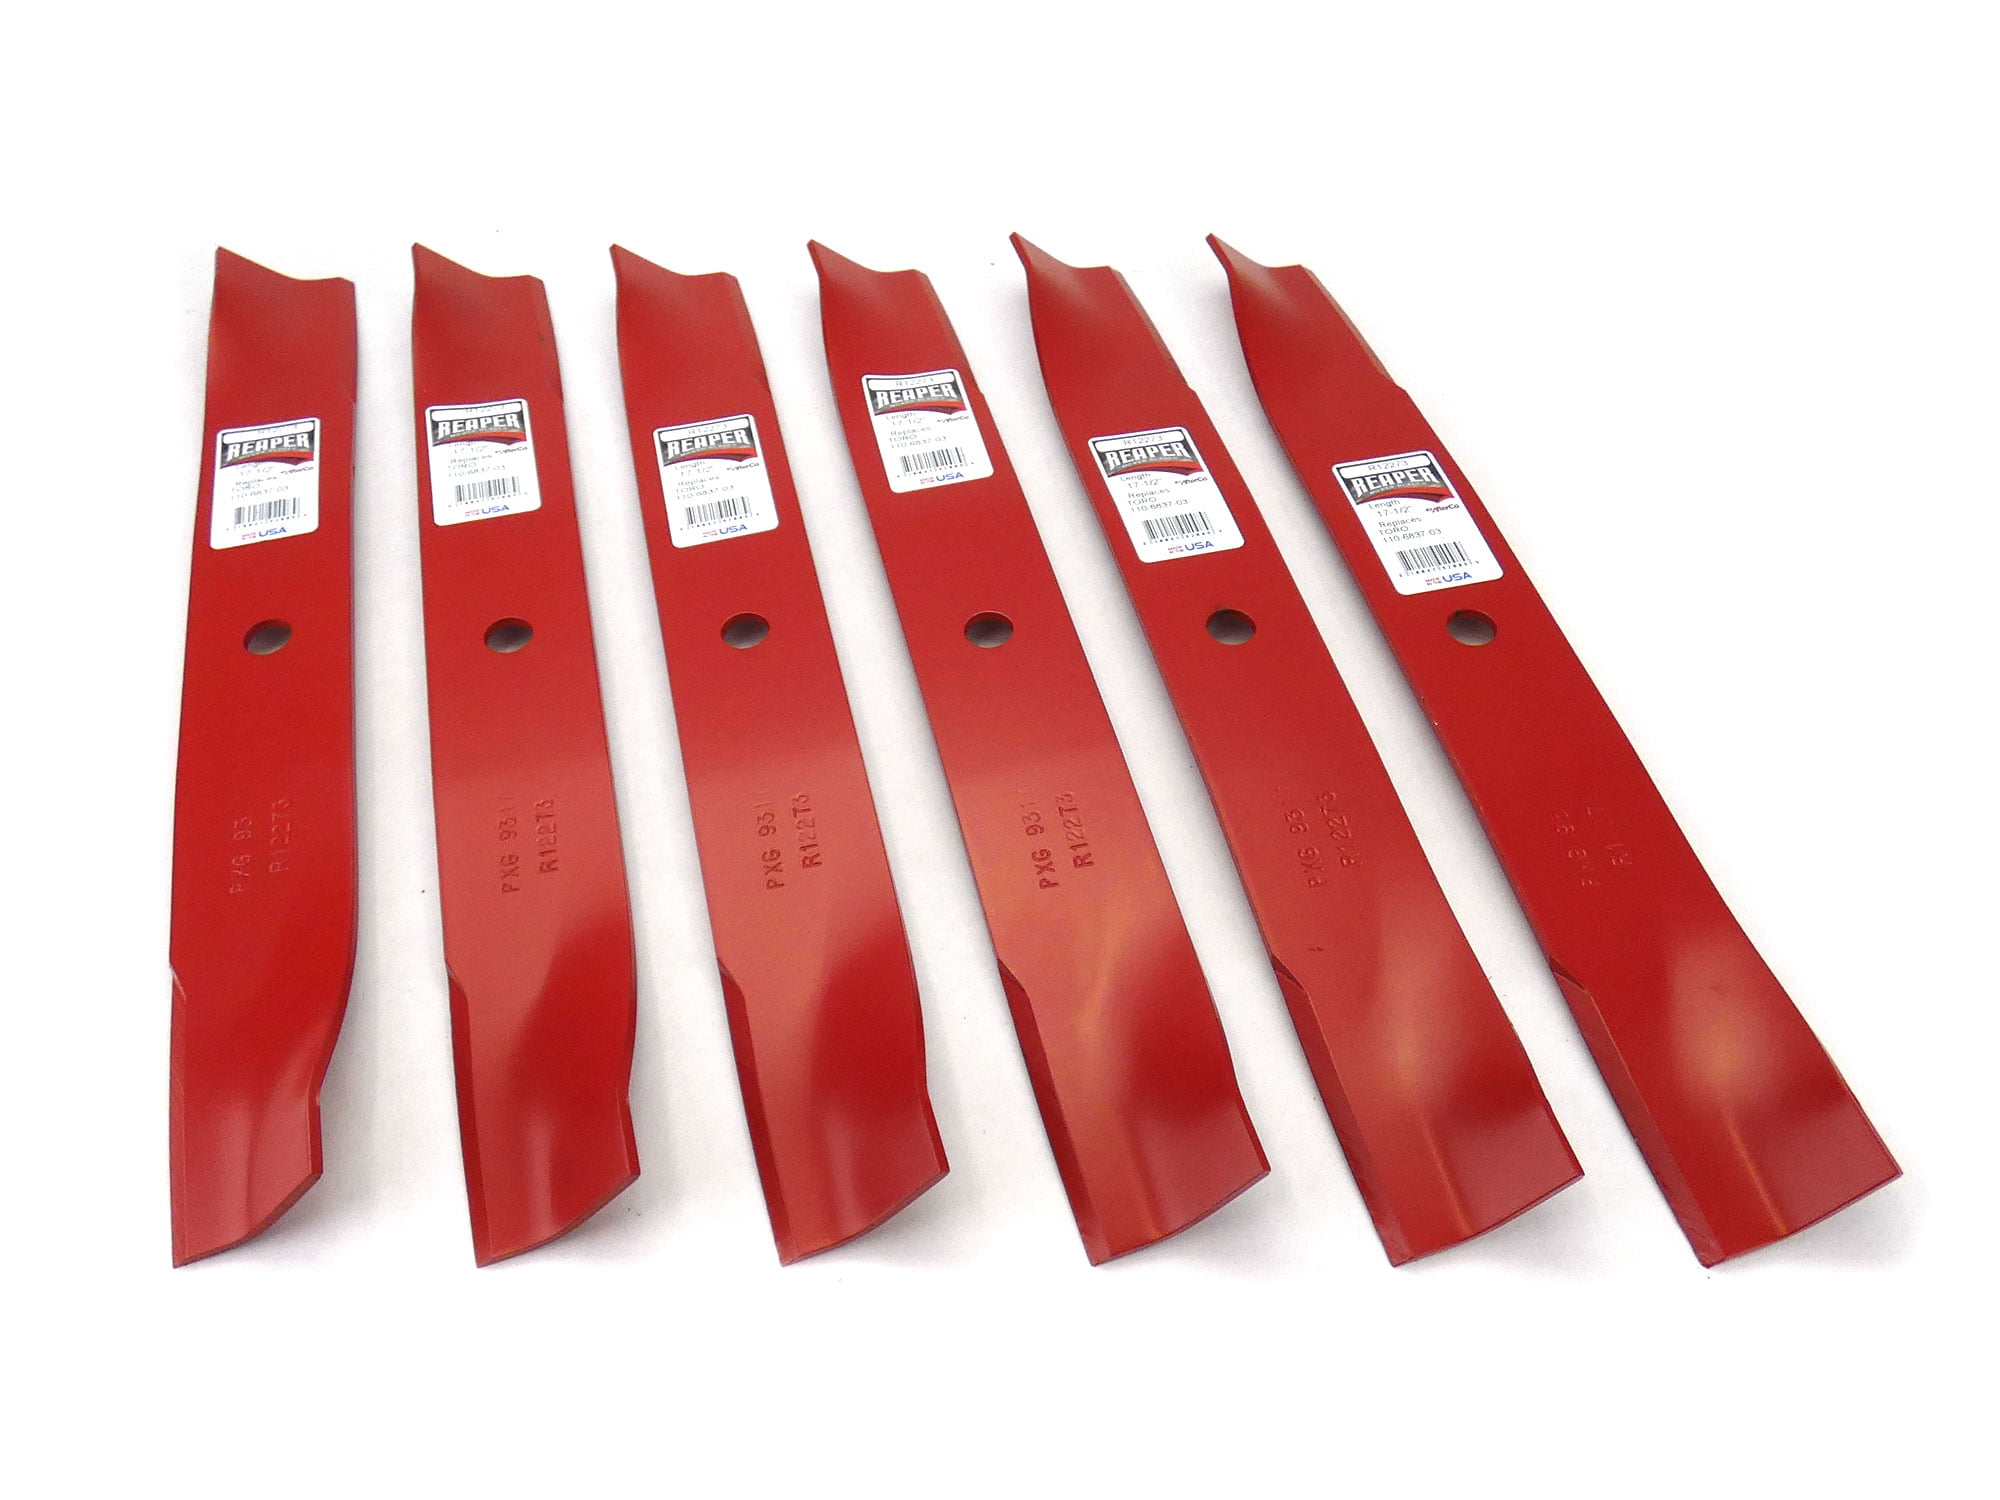 3 Reaper 50" Blades for Toro Replaces 110-6837-03 112-9759-03 Made in USA